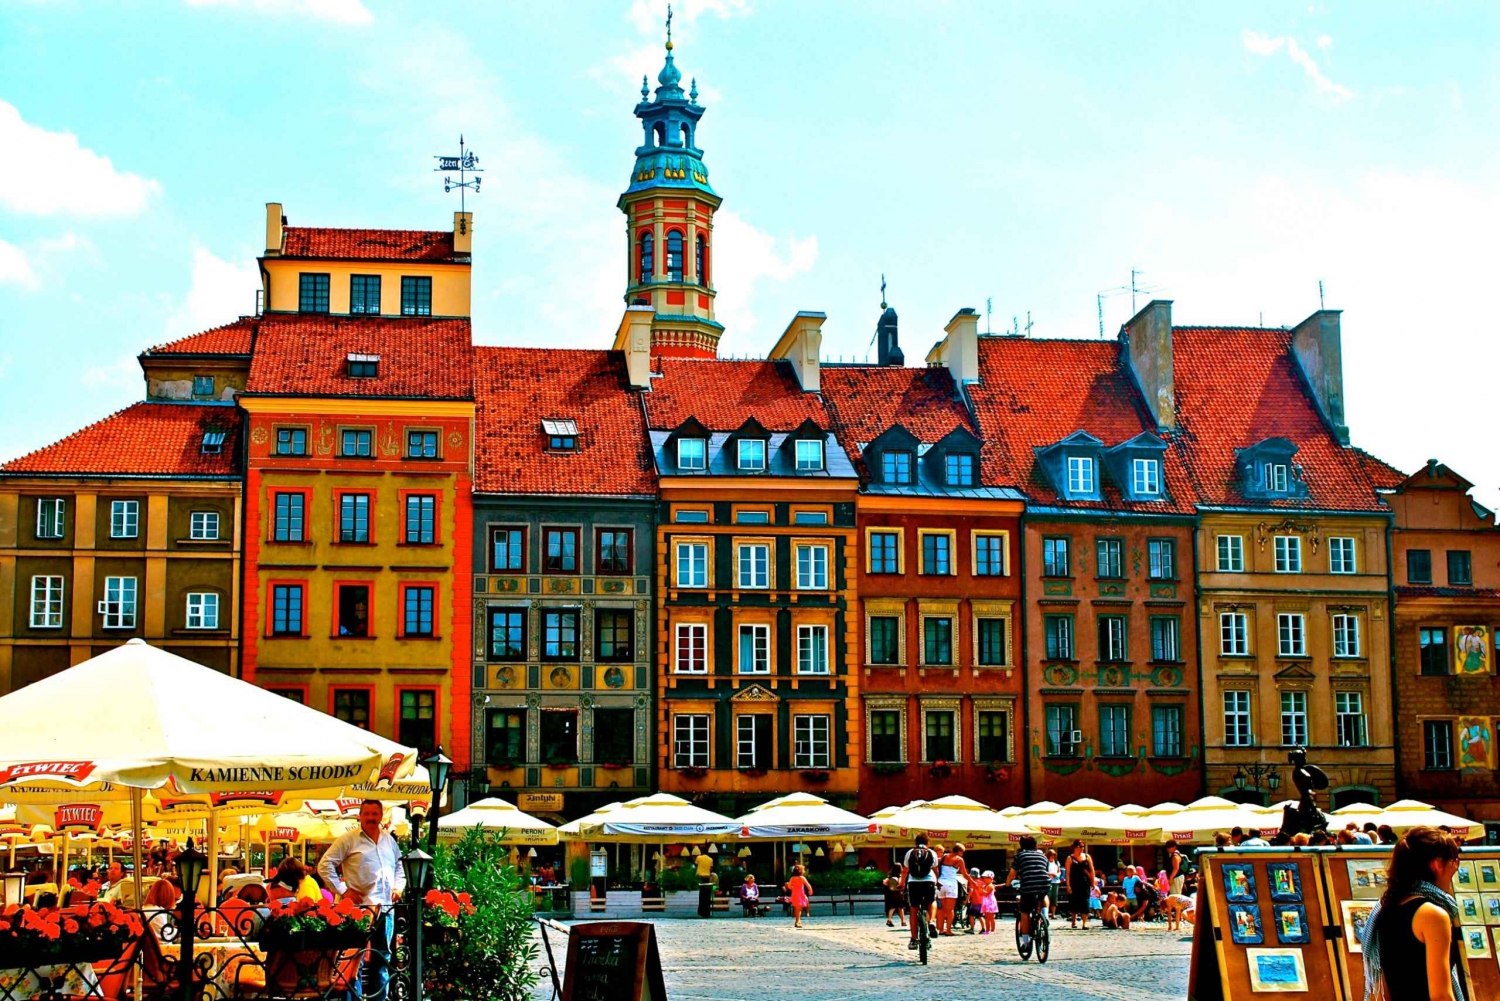 From Krakow: Warsaw Highlights Day Trip by Van